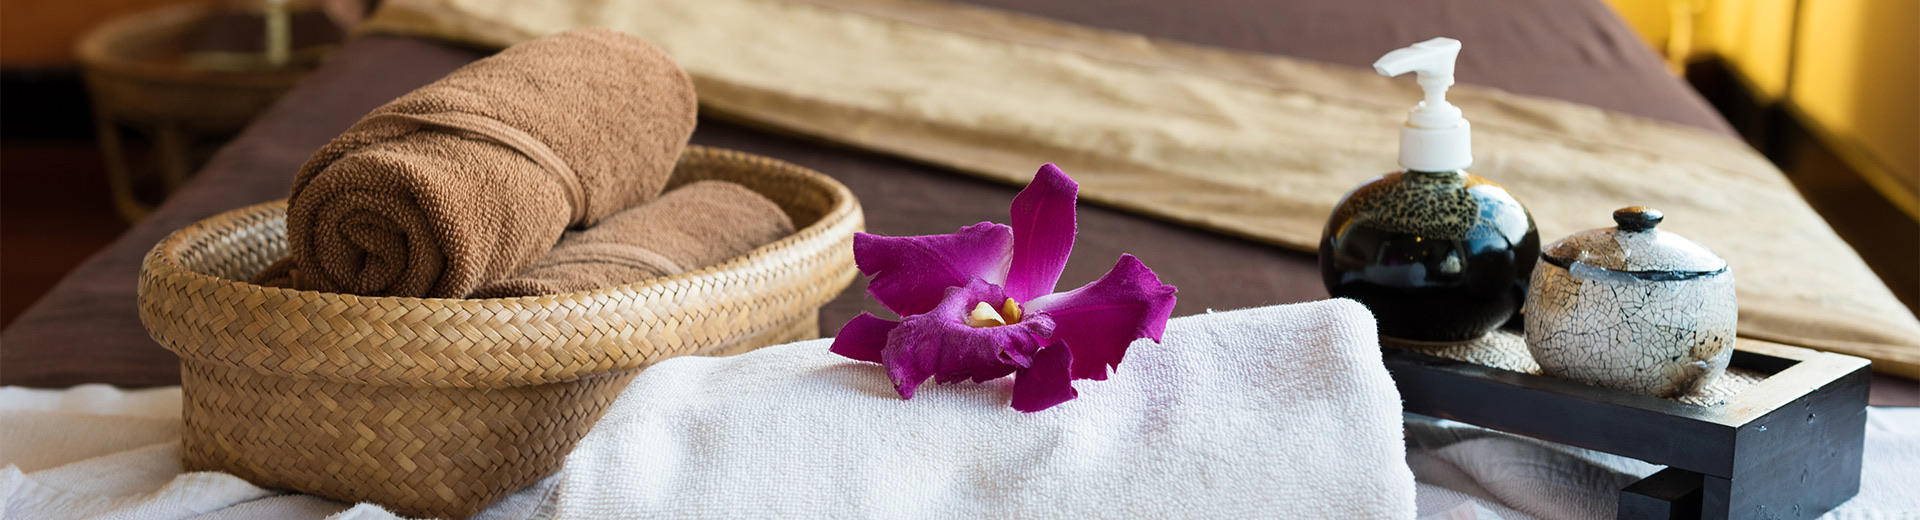 basket of brown towels next to a white towel with a purple flower on top